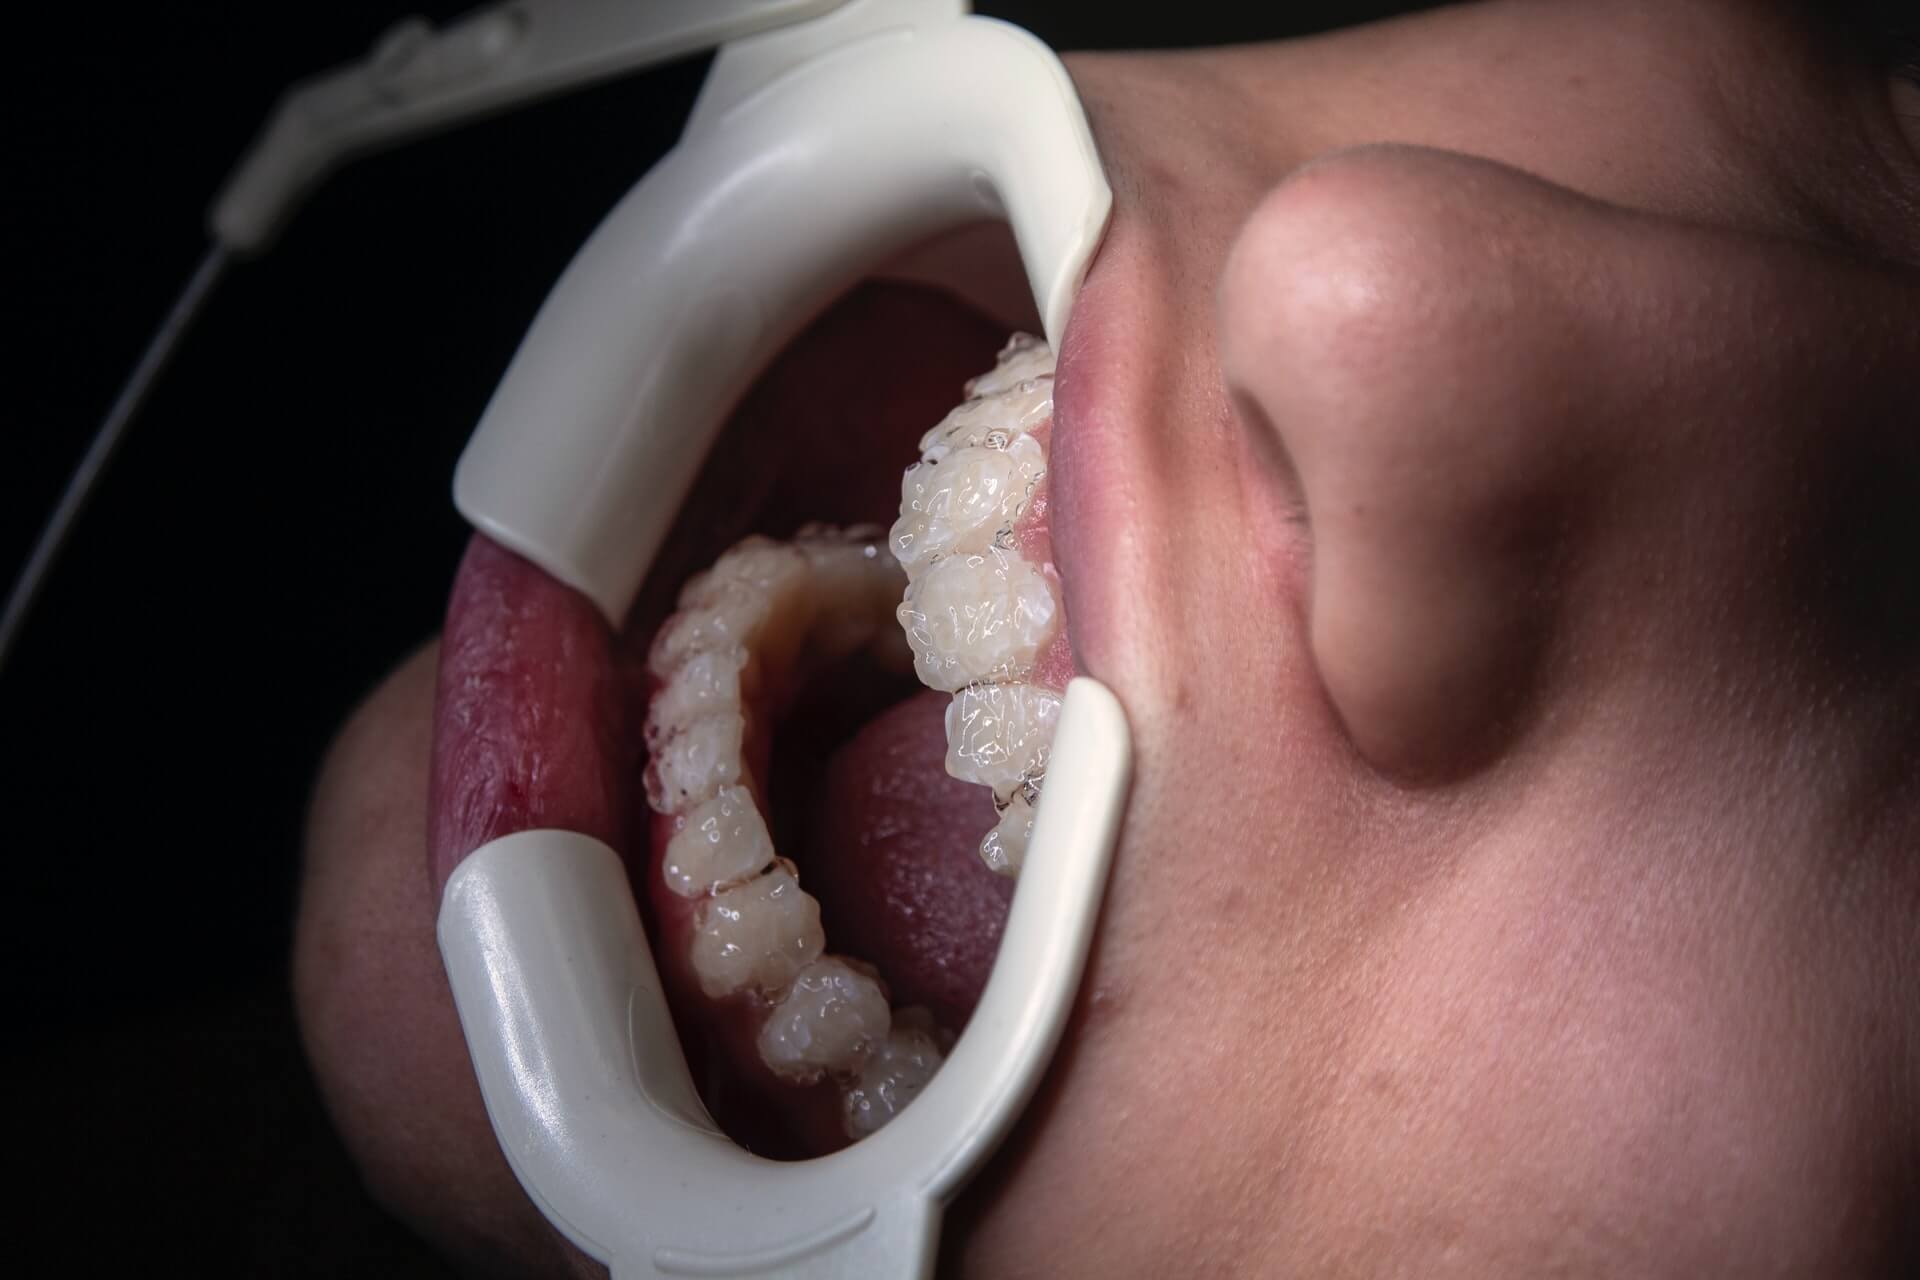 Cosmetic teeth whitening procedure at a dentist office